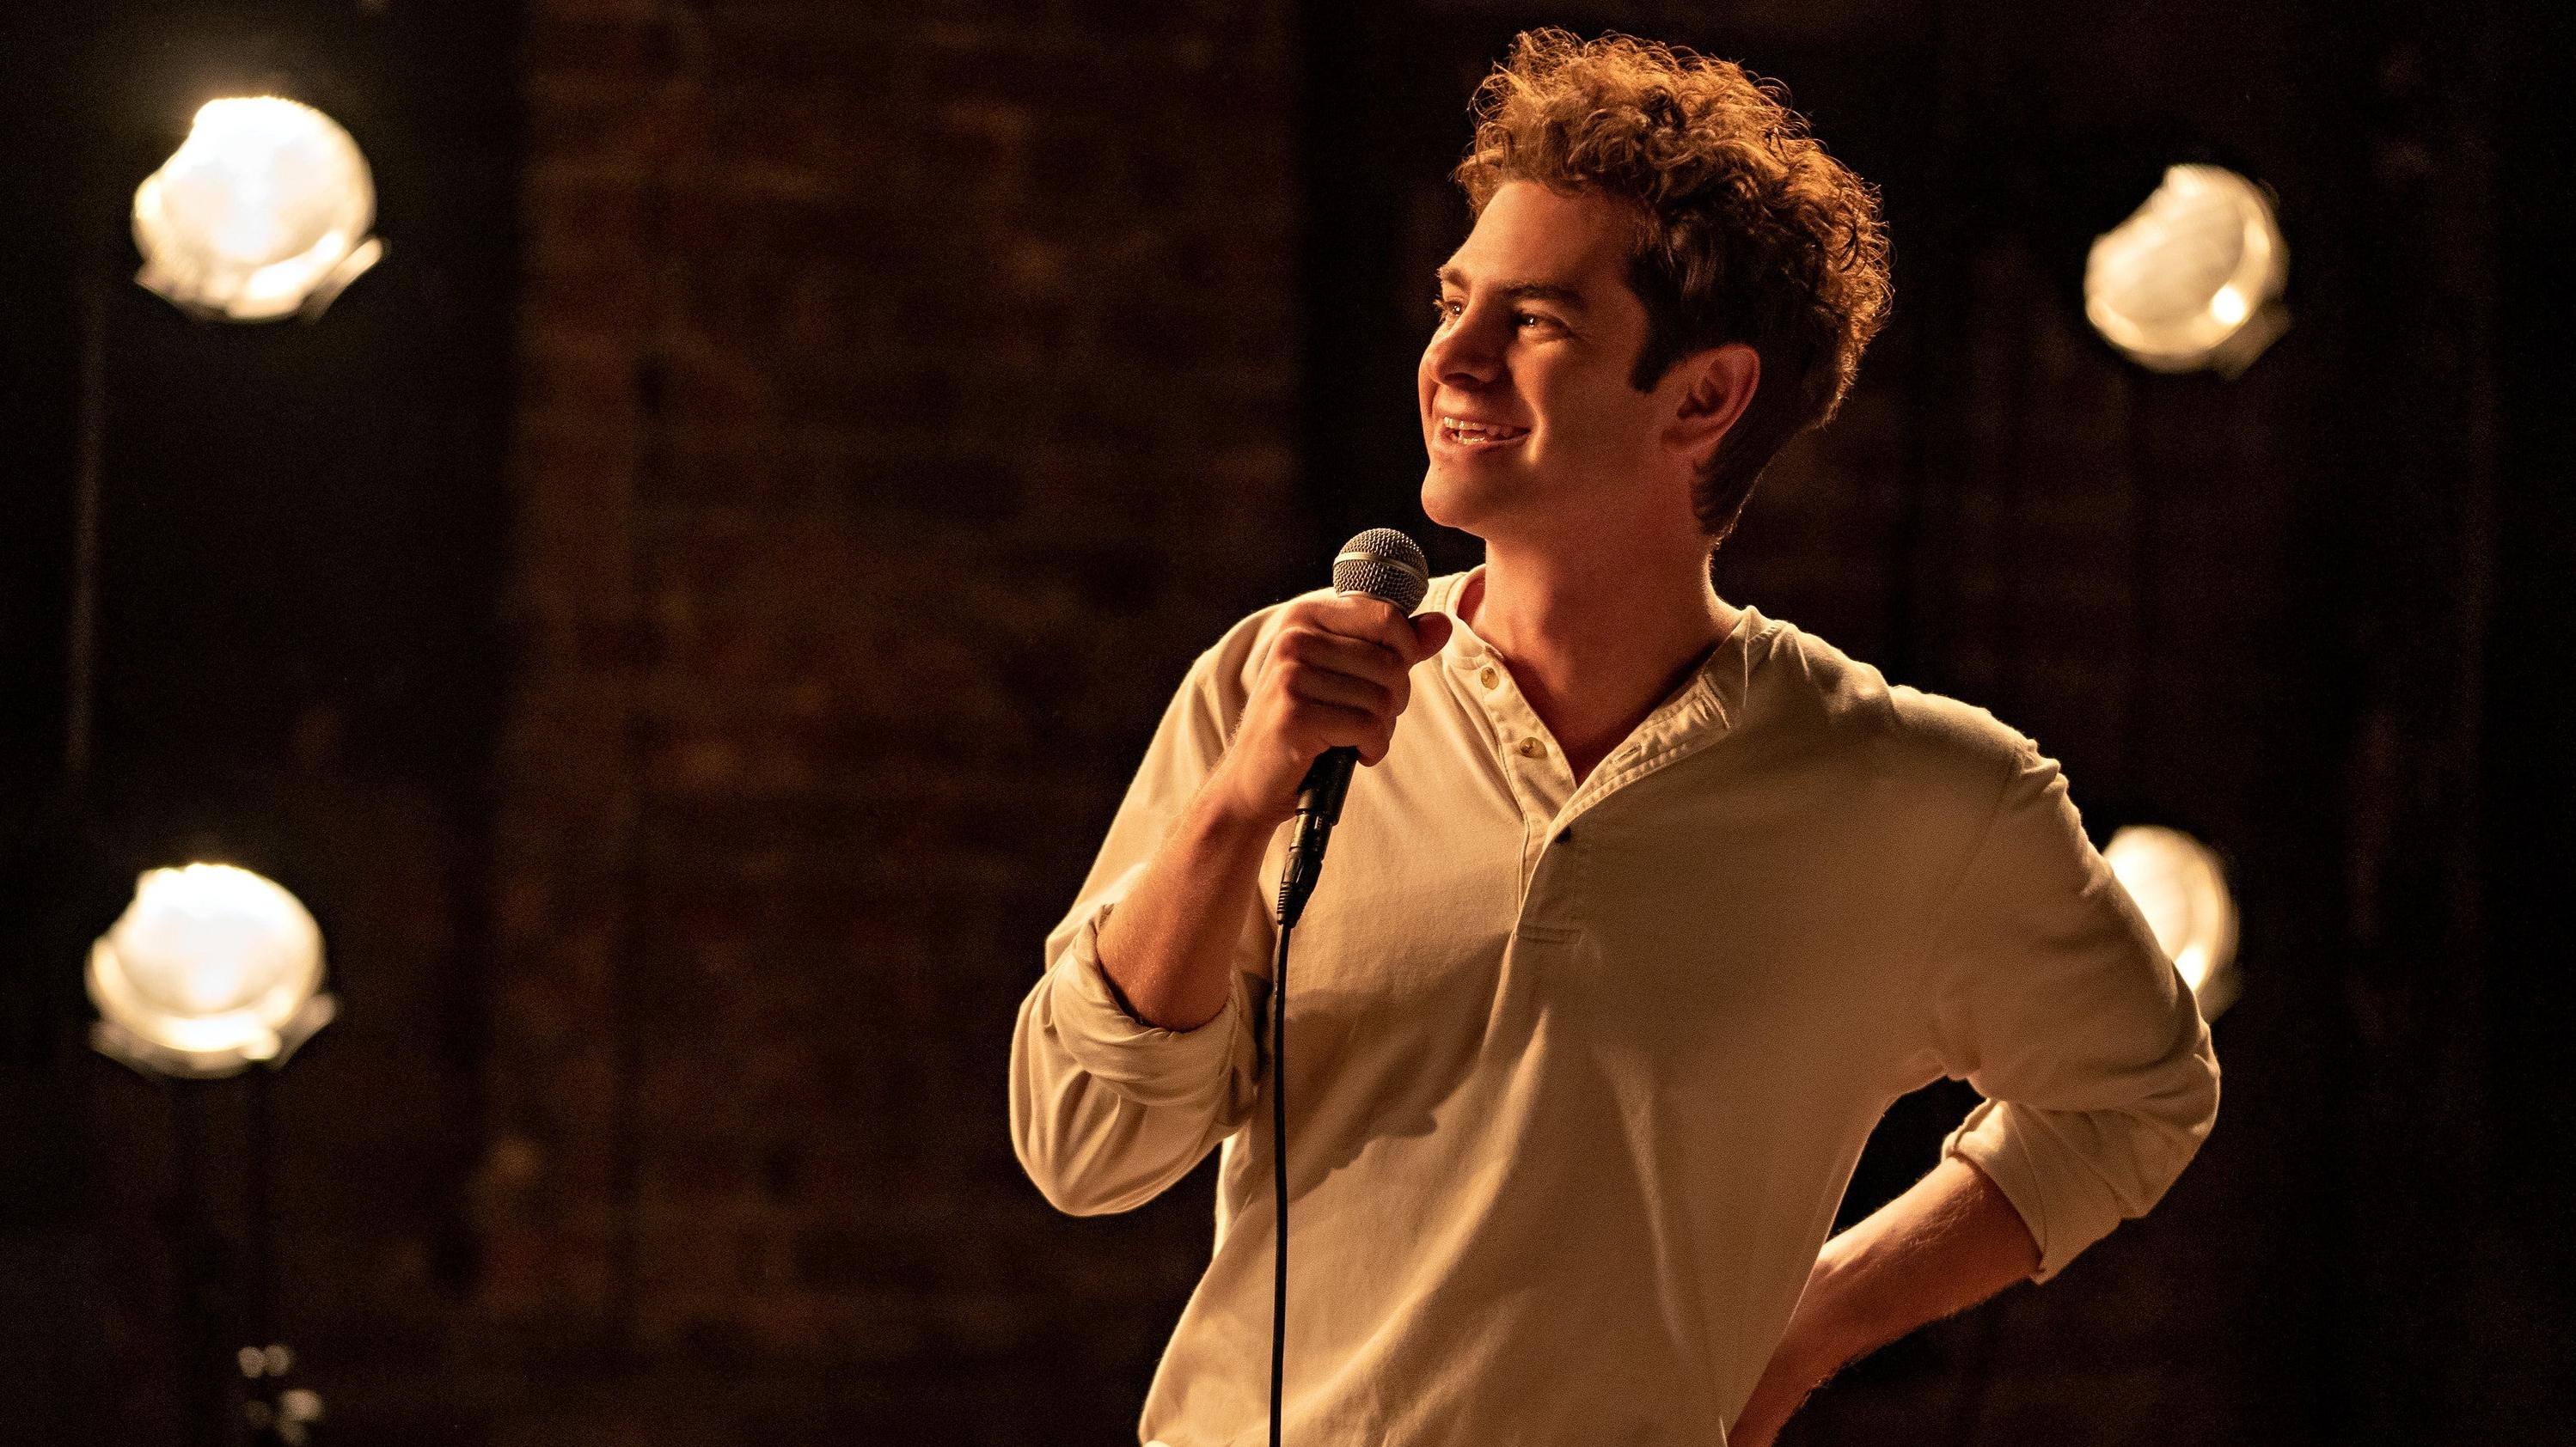 Andrew Garfield on Tick, Tick… Boom! and how art saved his life